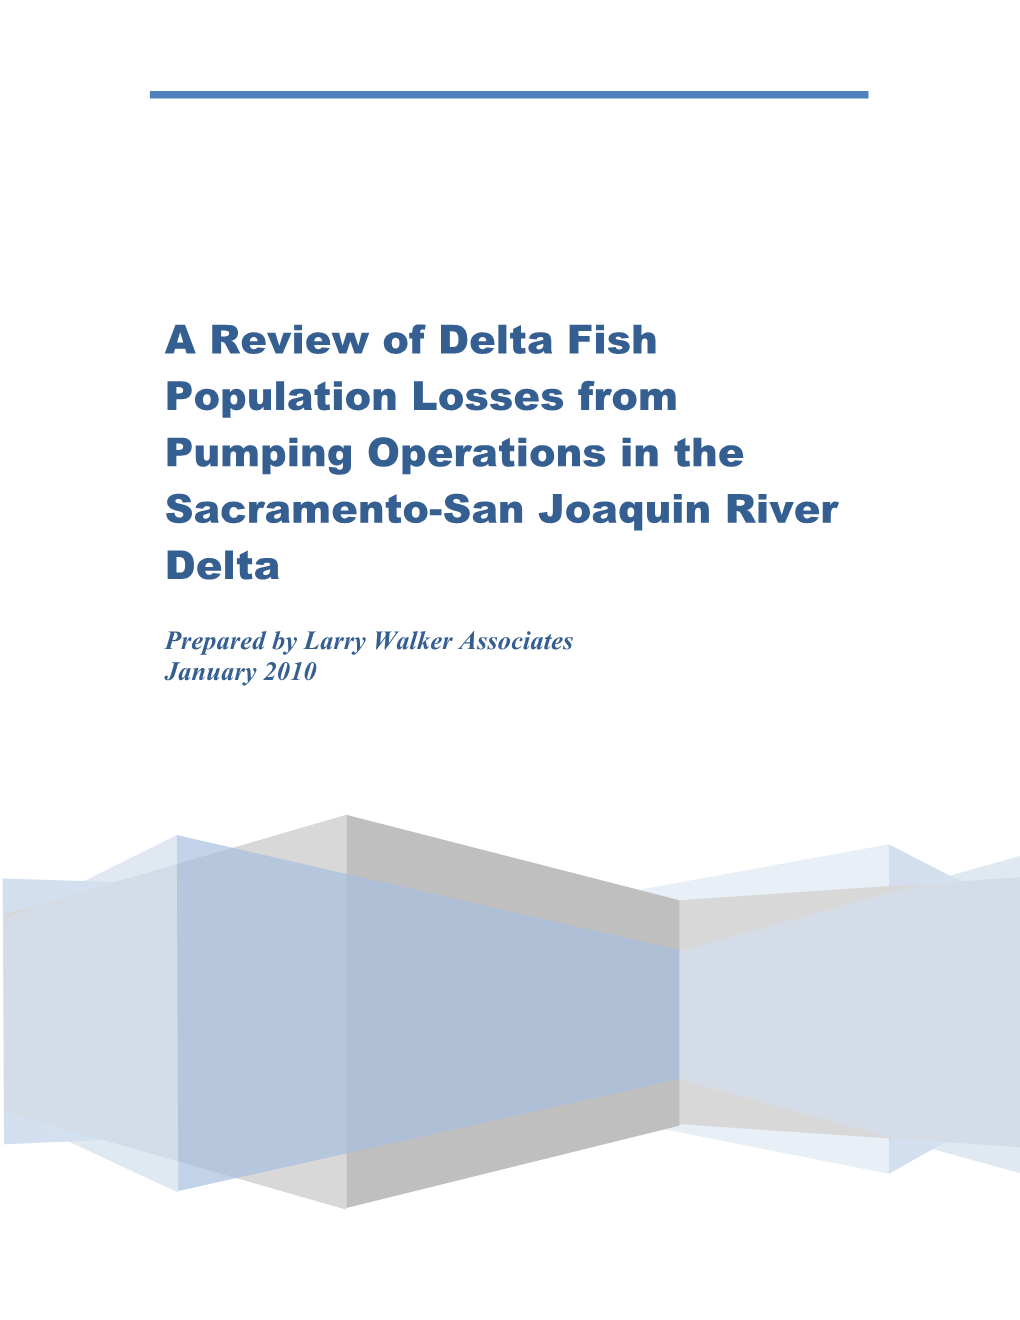 A Review of Delta Fish Population Losses from Pumping Operations in the Sacramento-San Joaquin River Delta